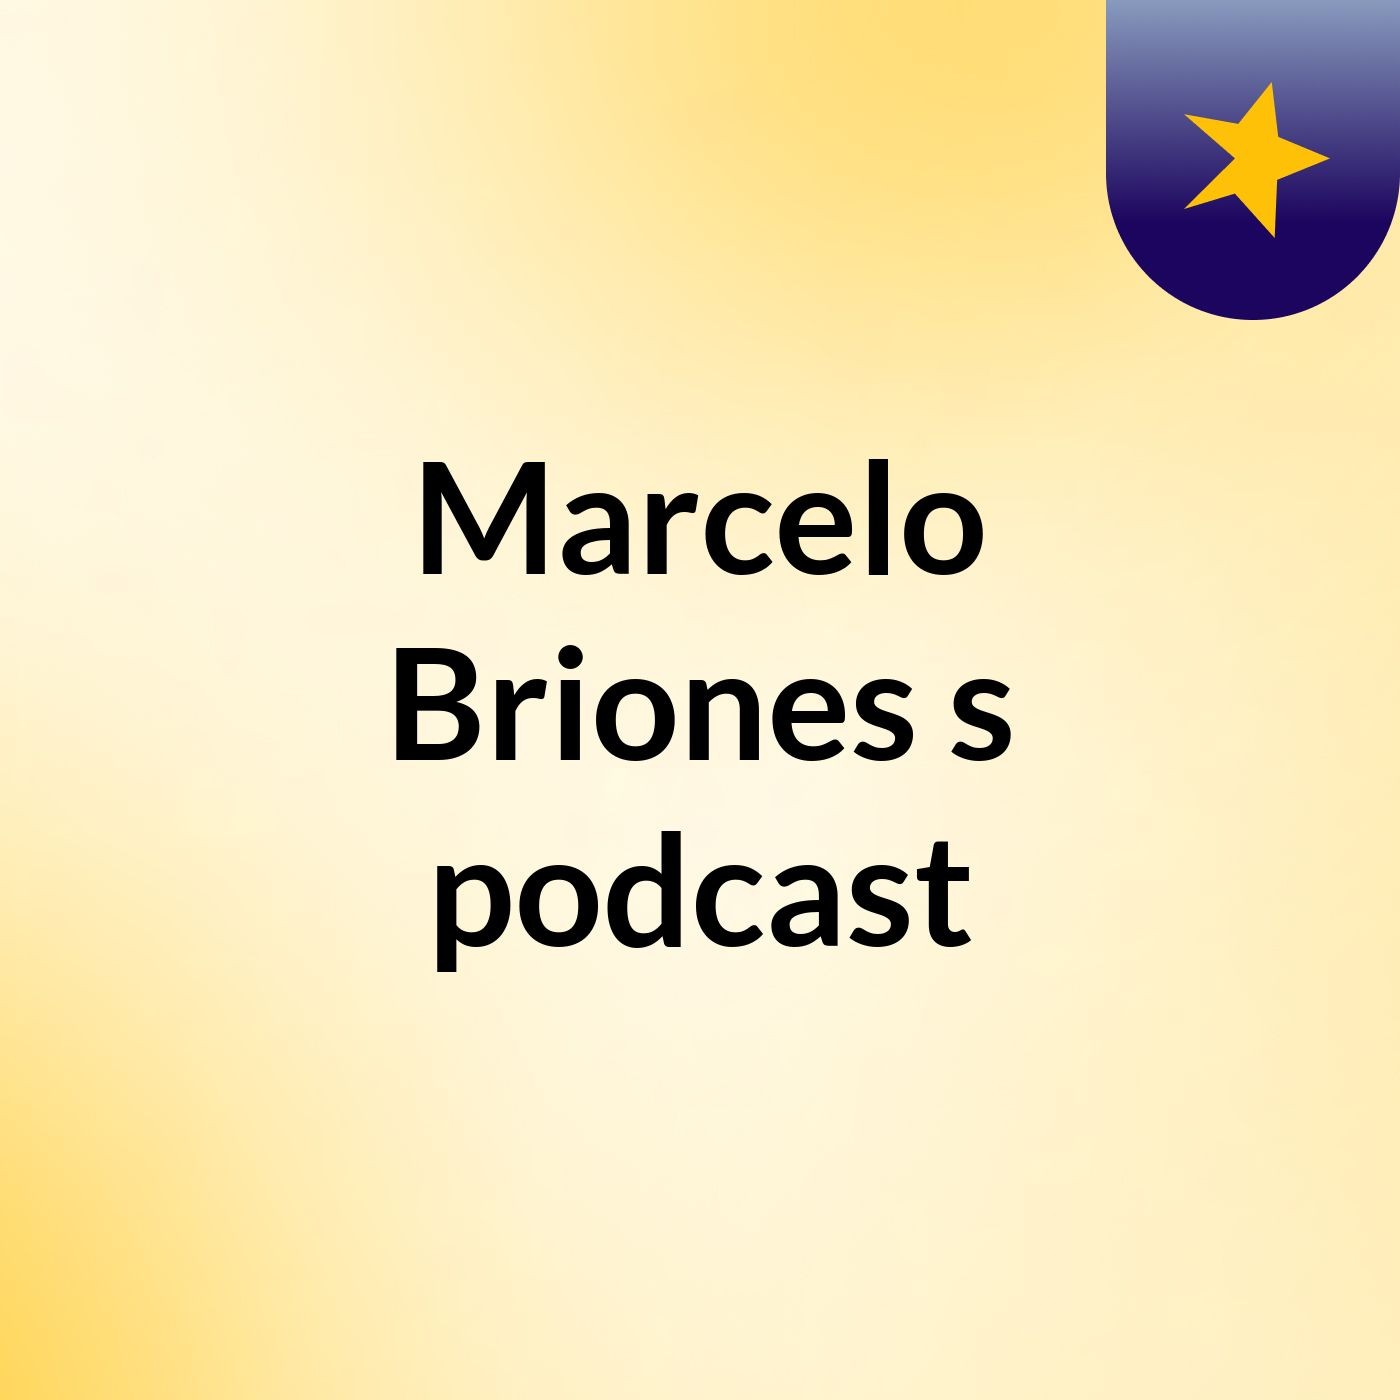 Marcelo Briones's podcast